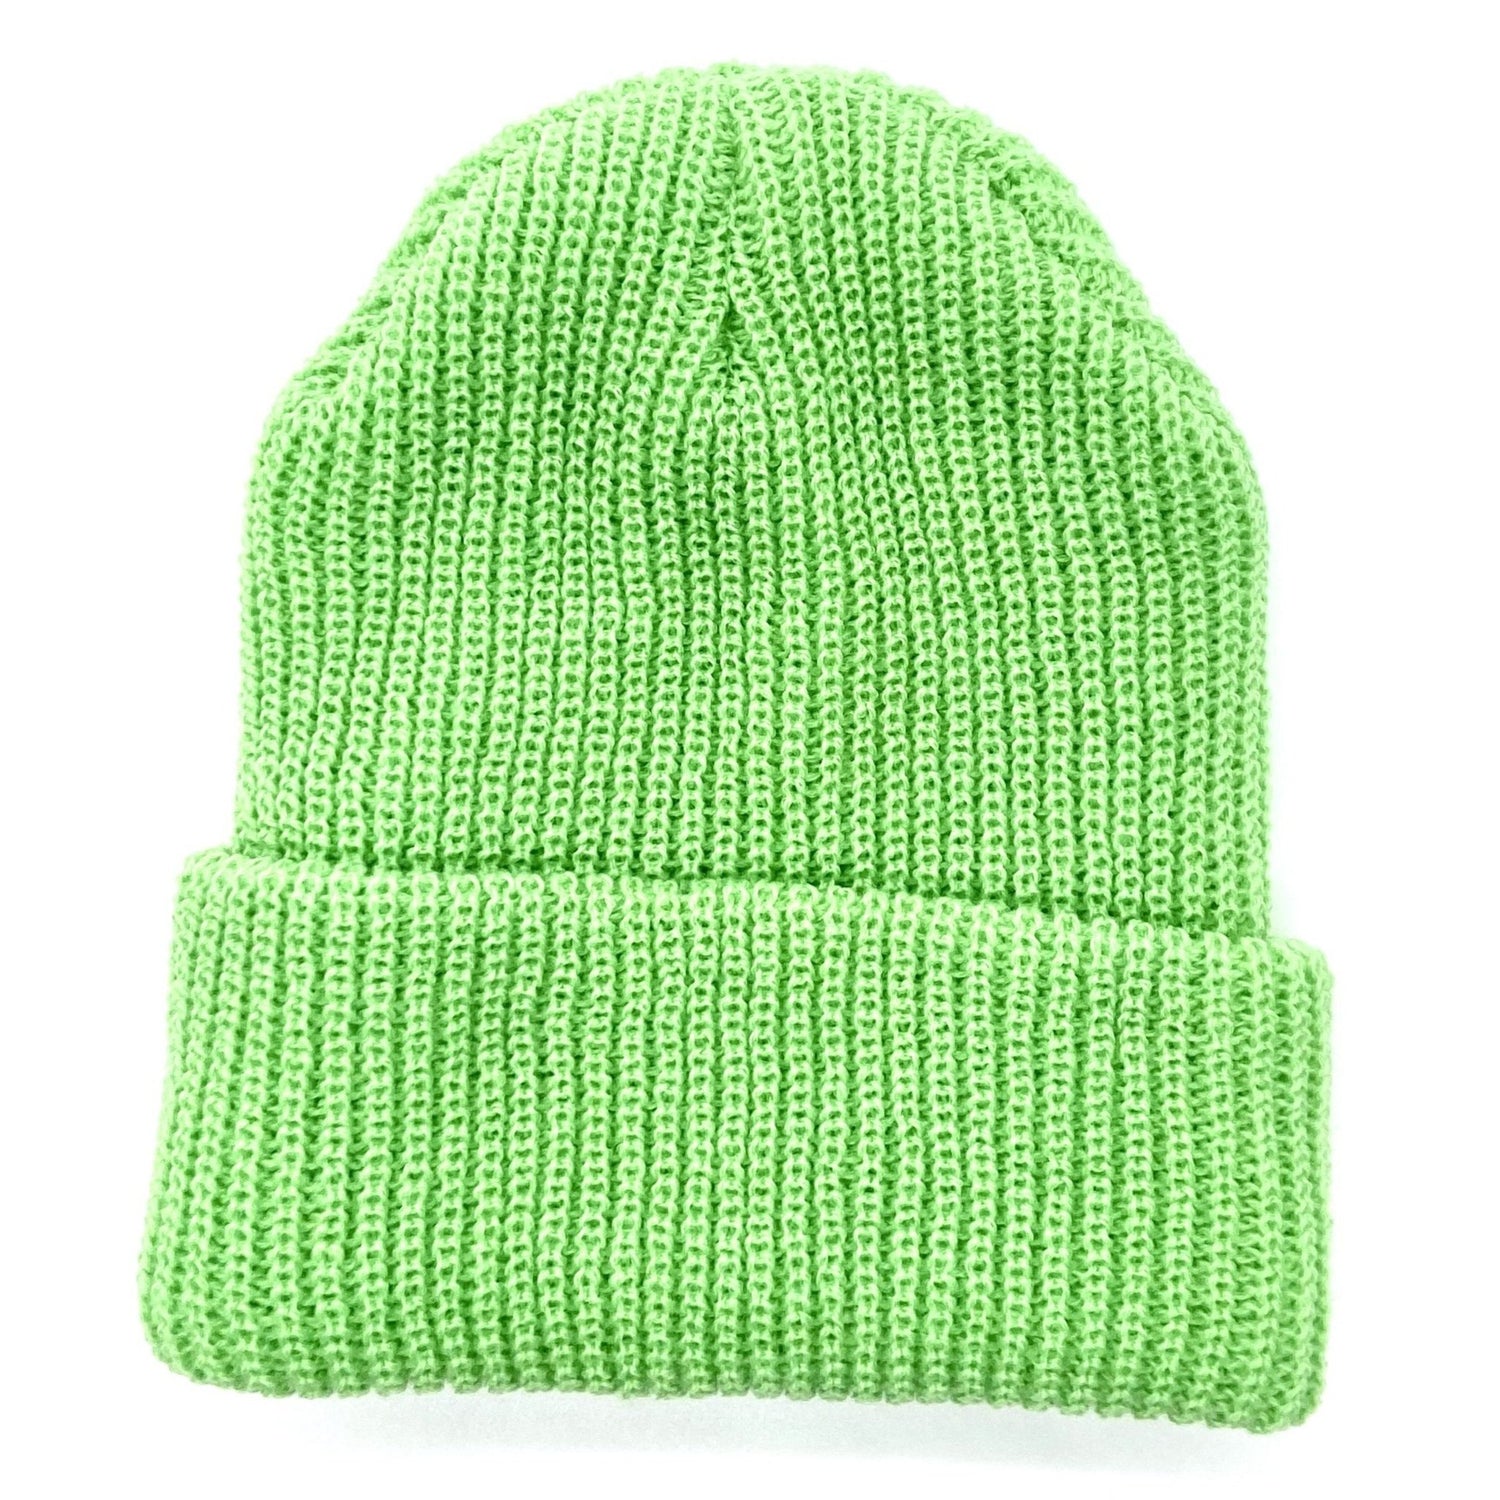 Stocking cap in lime green.